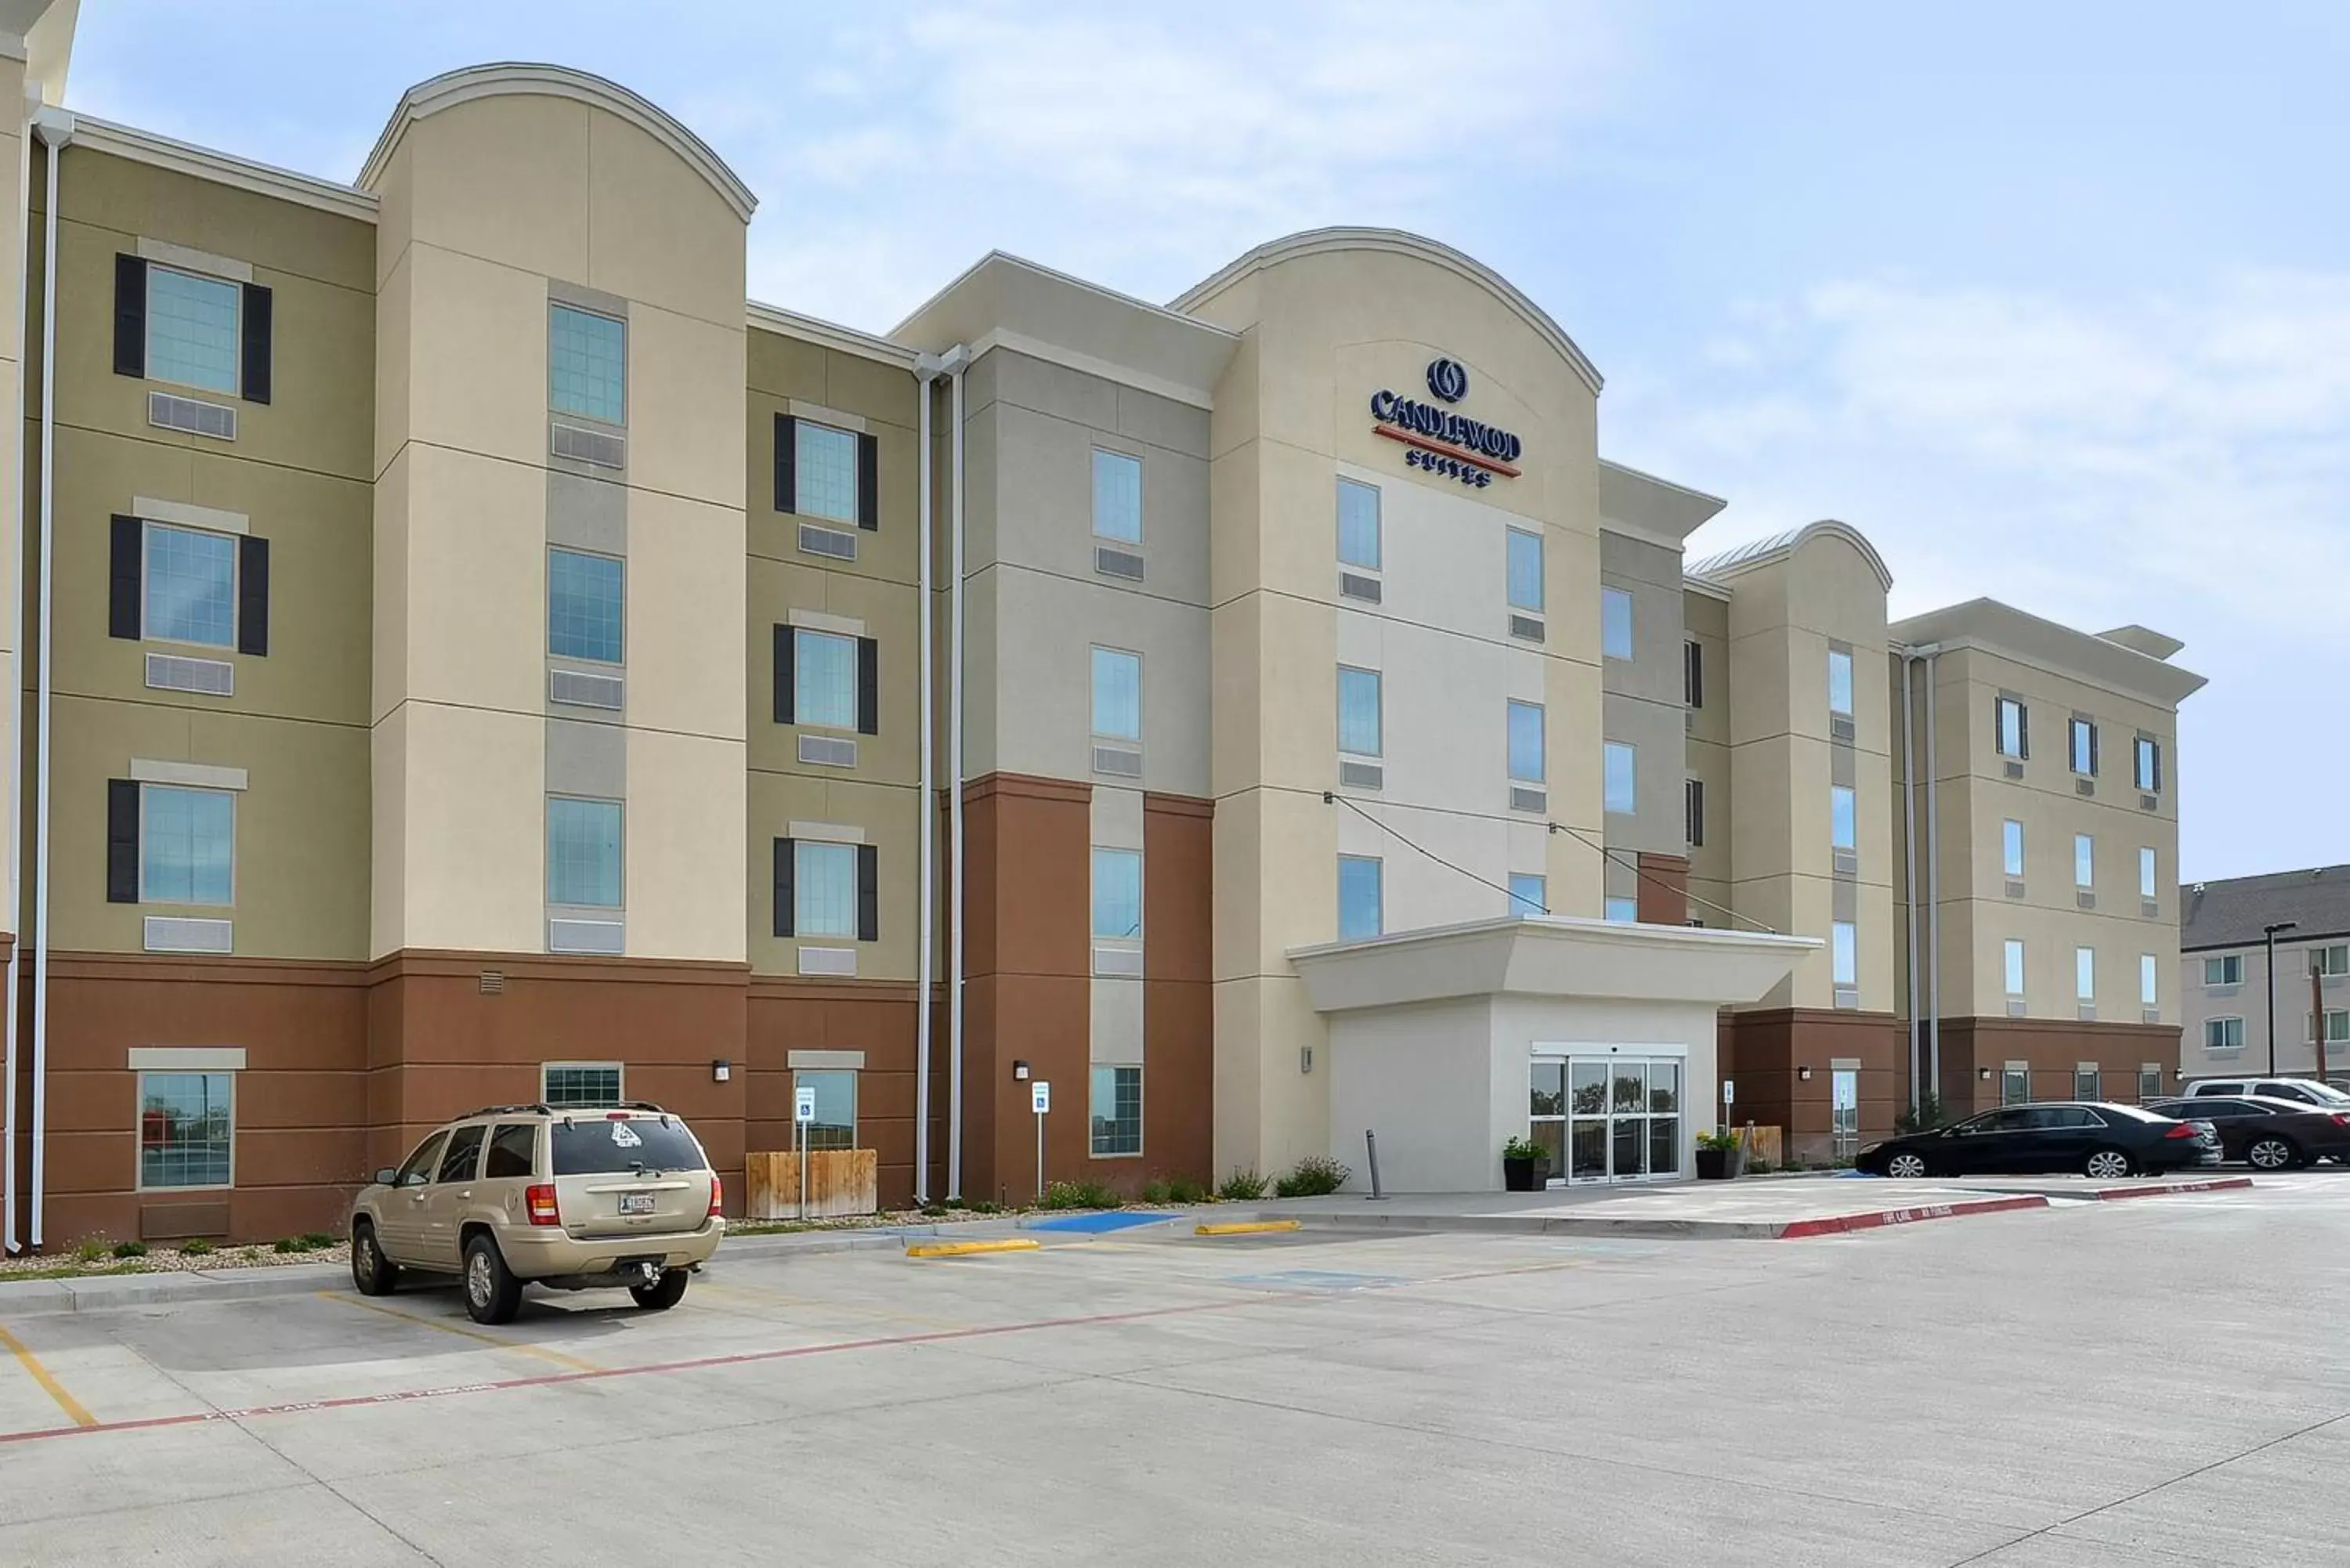 Property Building in Candlewood Suites Monahans, an IHG Hotel